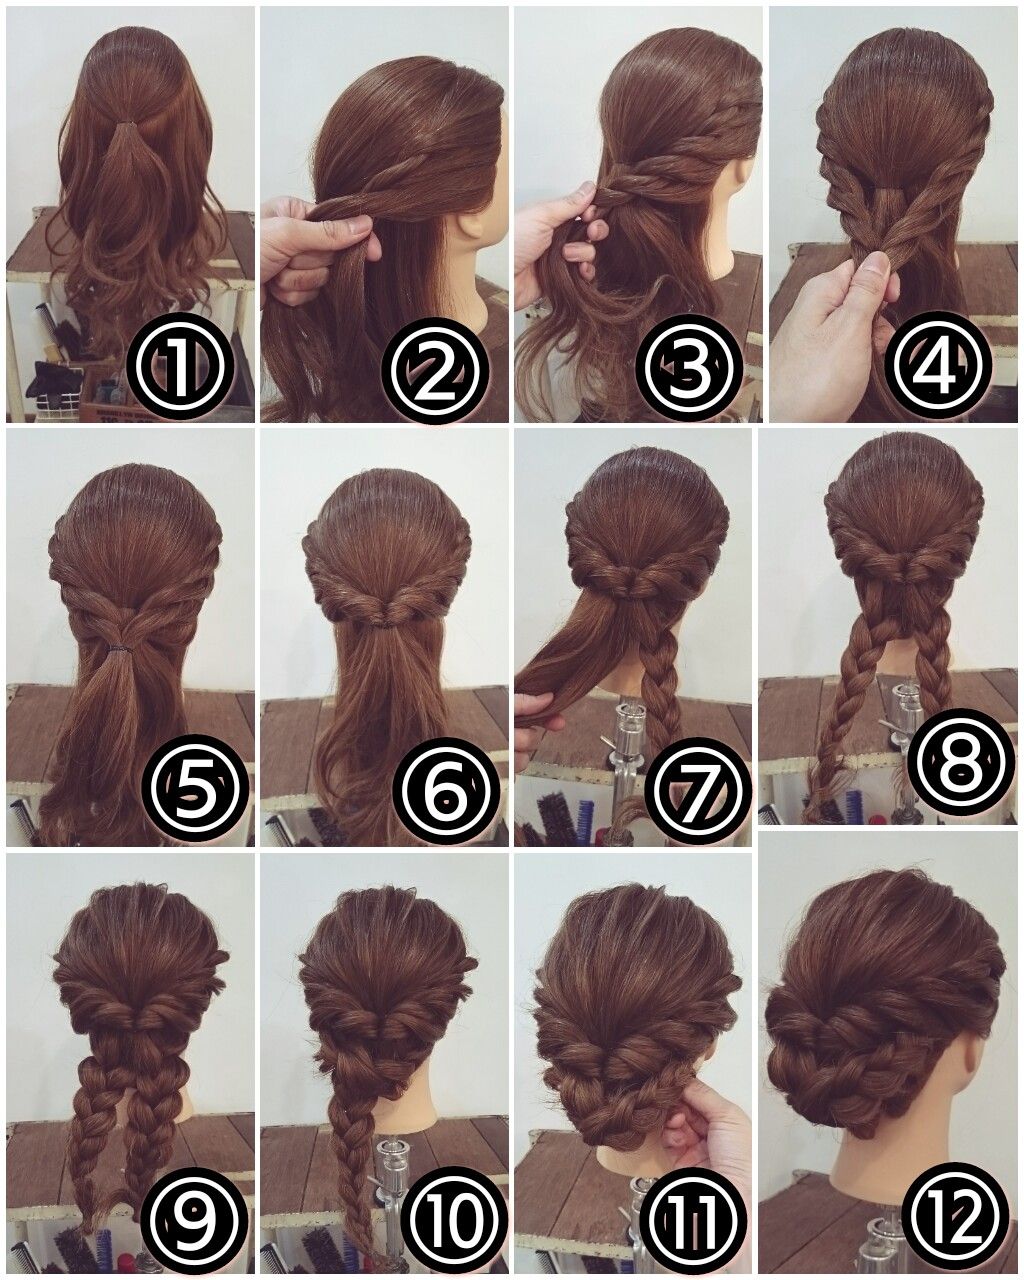 Chic Braided Bun Hairstyles for Any Occasion